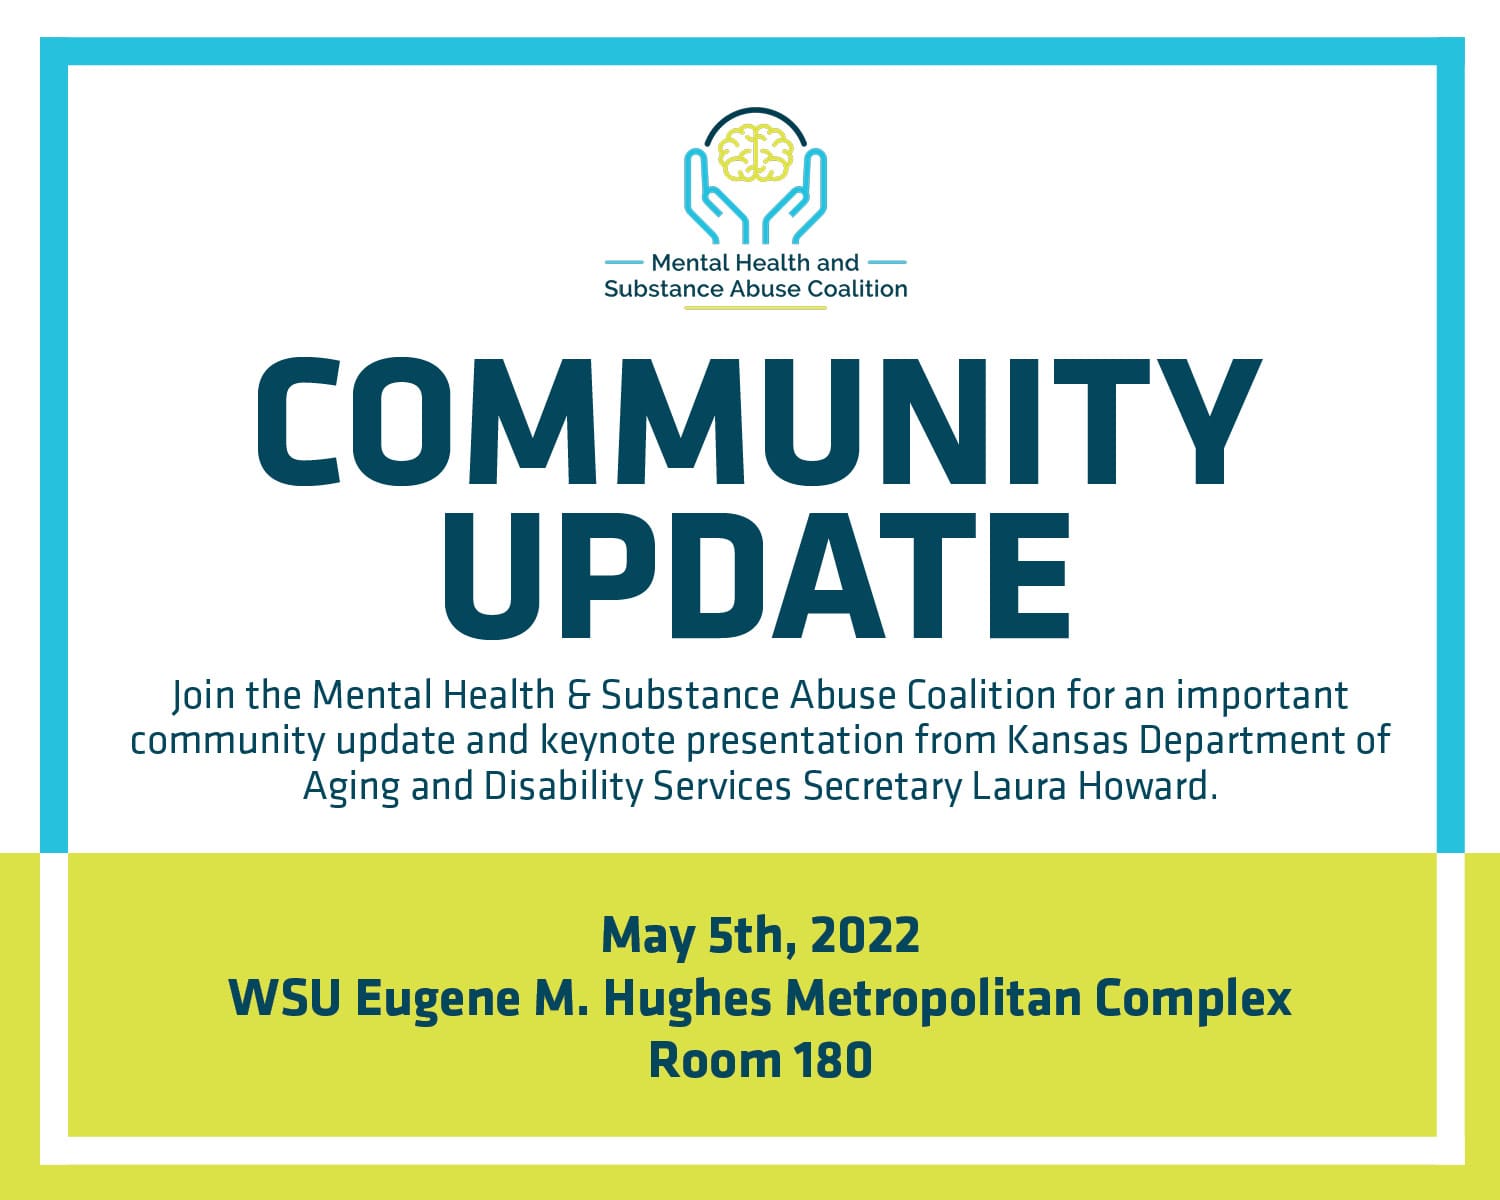 Mental Health & Substance Abuse Coalition Community Update: loin the Mental Health & Substance Abuse Coalition for an important community update and keynote presentation from Kansas Department of Aging and Disability Services Secretary Laura Howard. May 5th, 2022 at the WSU Eugene M. Hughes Metropolitan Complex, Room 180. Event Schedule: 8:30-9 am Registration; 9-9:30 am Welcome; 9:30-10:15 am Panel and Q&A; 10:15-10:30 am Break; 10:30-11:45 am Panel and Q&A 11:15-11:45 am Secretary Laura Howard